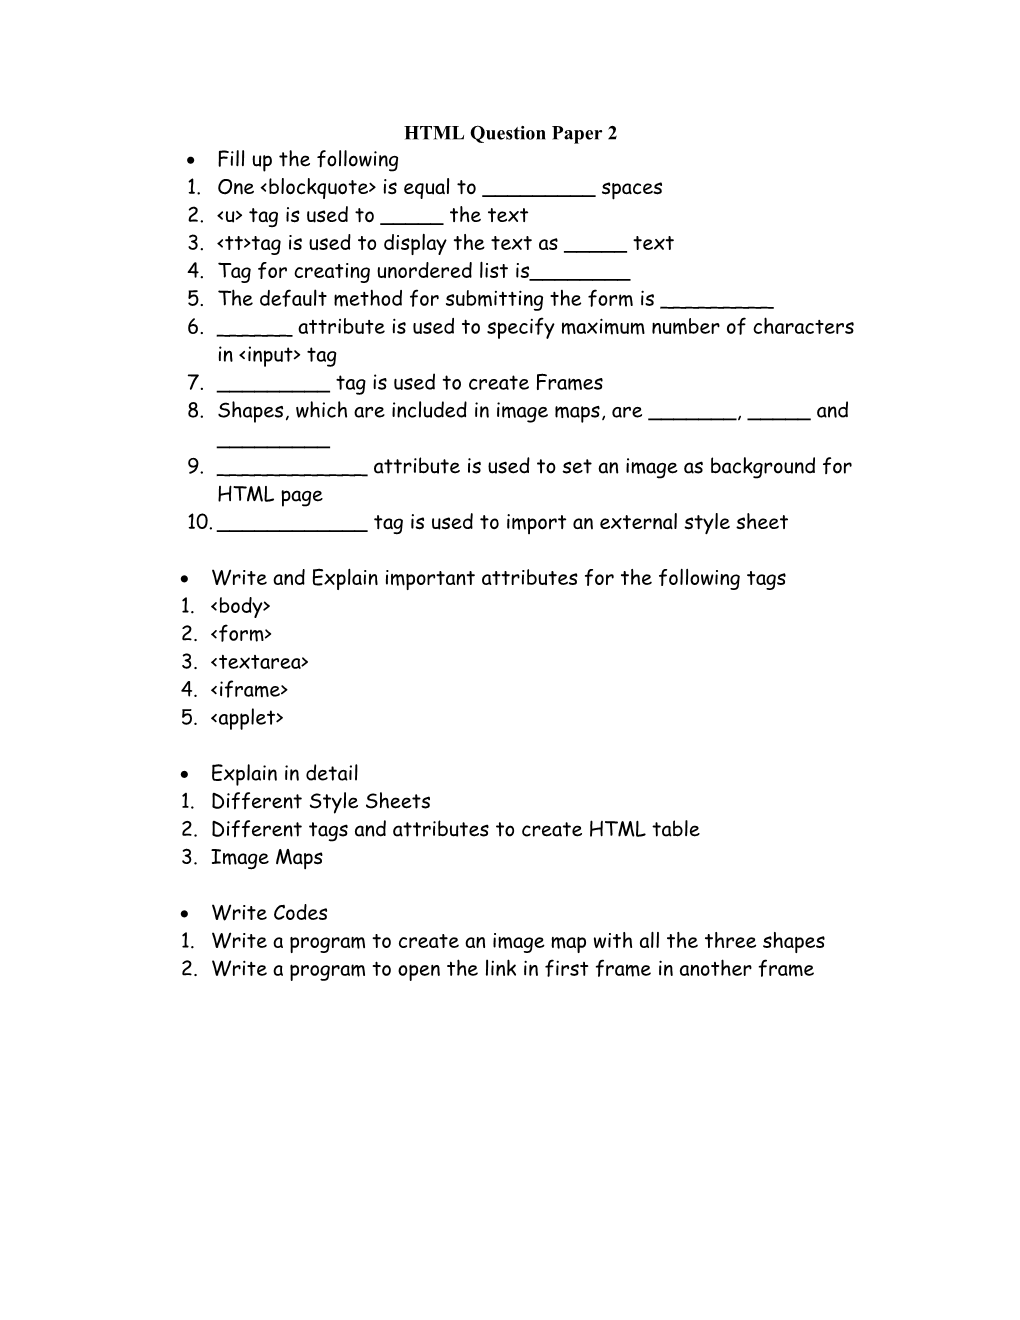 HTML Question Paper 2